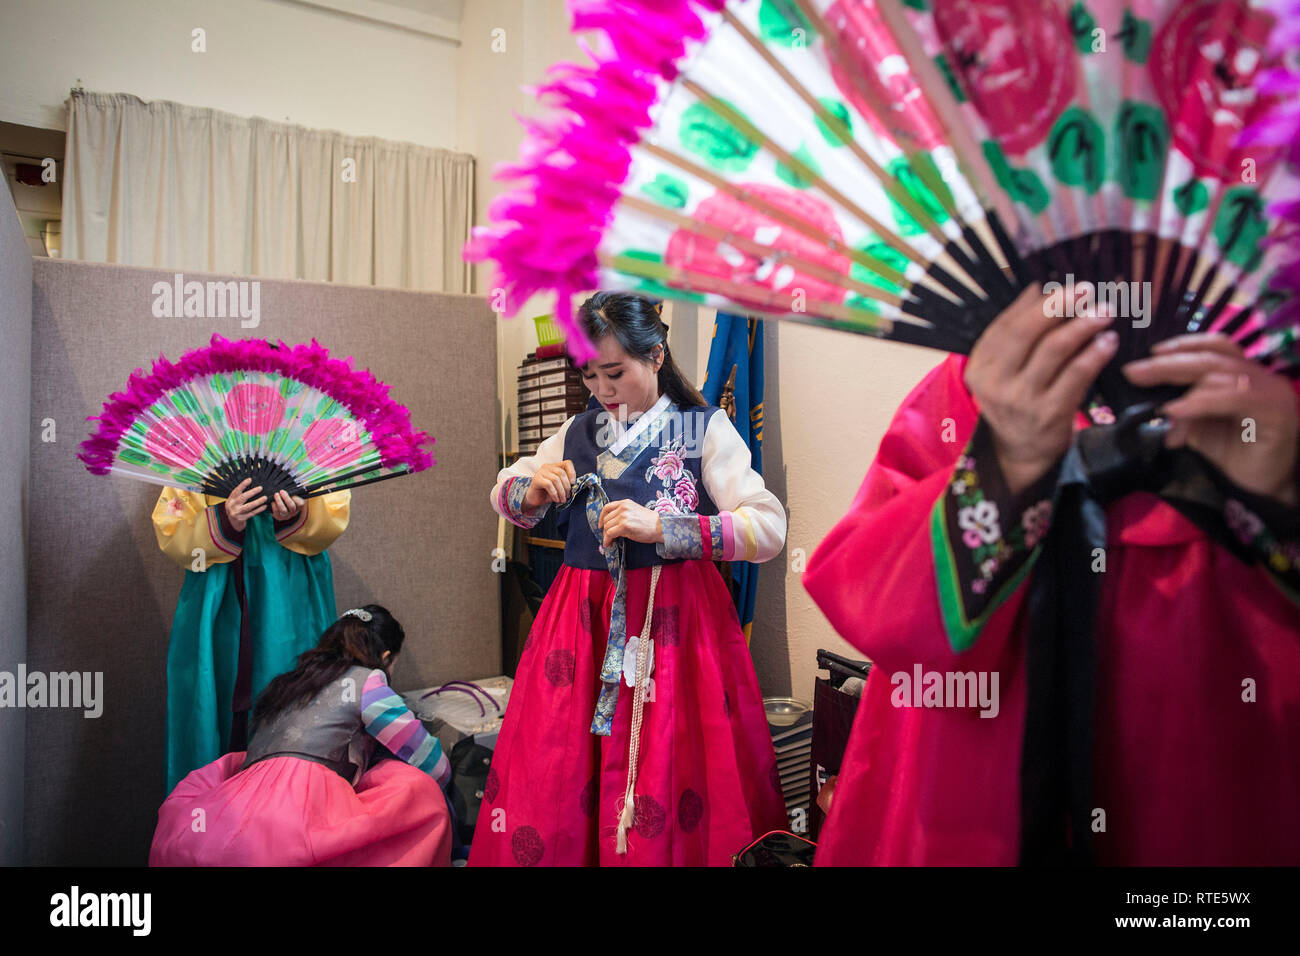 London, UK. 1st March 2019. Korean Ladies prepare to perform the traditional Buchaechum also known as the Fan Dance on the day Korea Commemorates 100th Anniversary of March 1st Independence Movement at New Malden Methodist Church, London, England, UK The historic remembrances have implications for modern-day relations between the two Koreas, and with Japan. On Friday North and South Koreans in New Malden commemorate the 100th anniversary of the March 1st Movement, a mass demonstration of Korean resistance against Japanese colonial rule. Credit: Jeff Gilbert/Alamy Live News Stock Photo